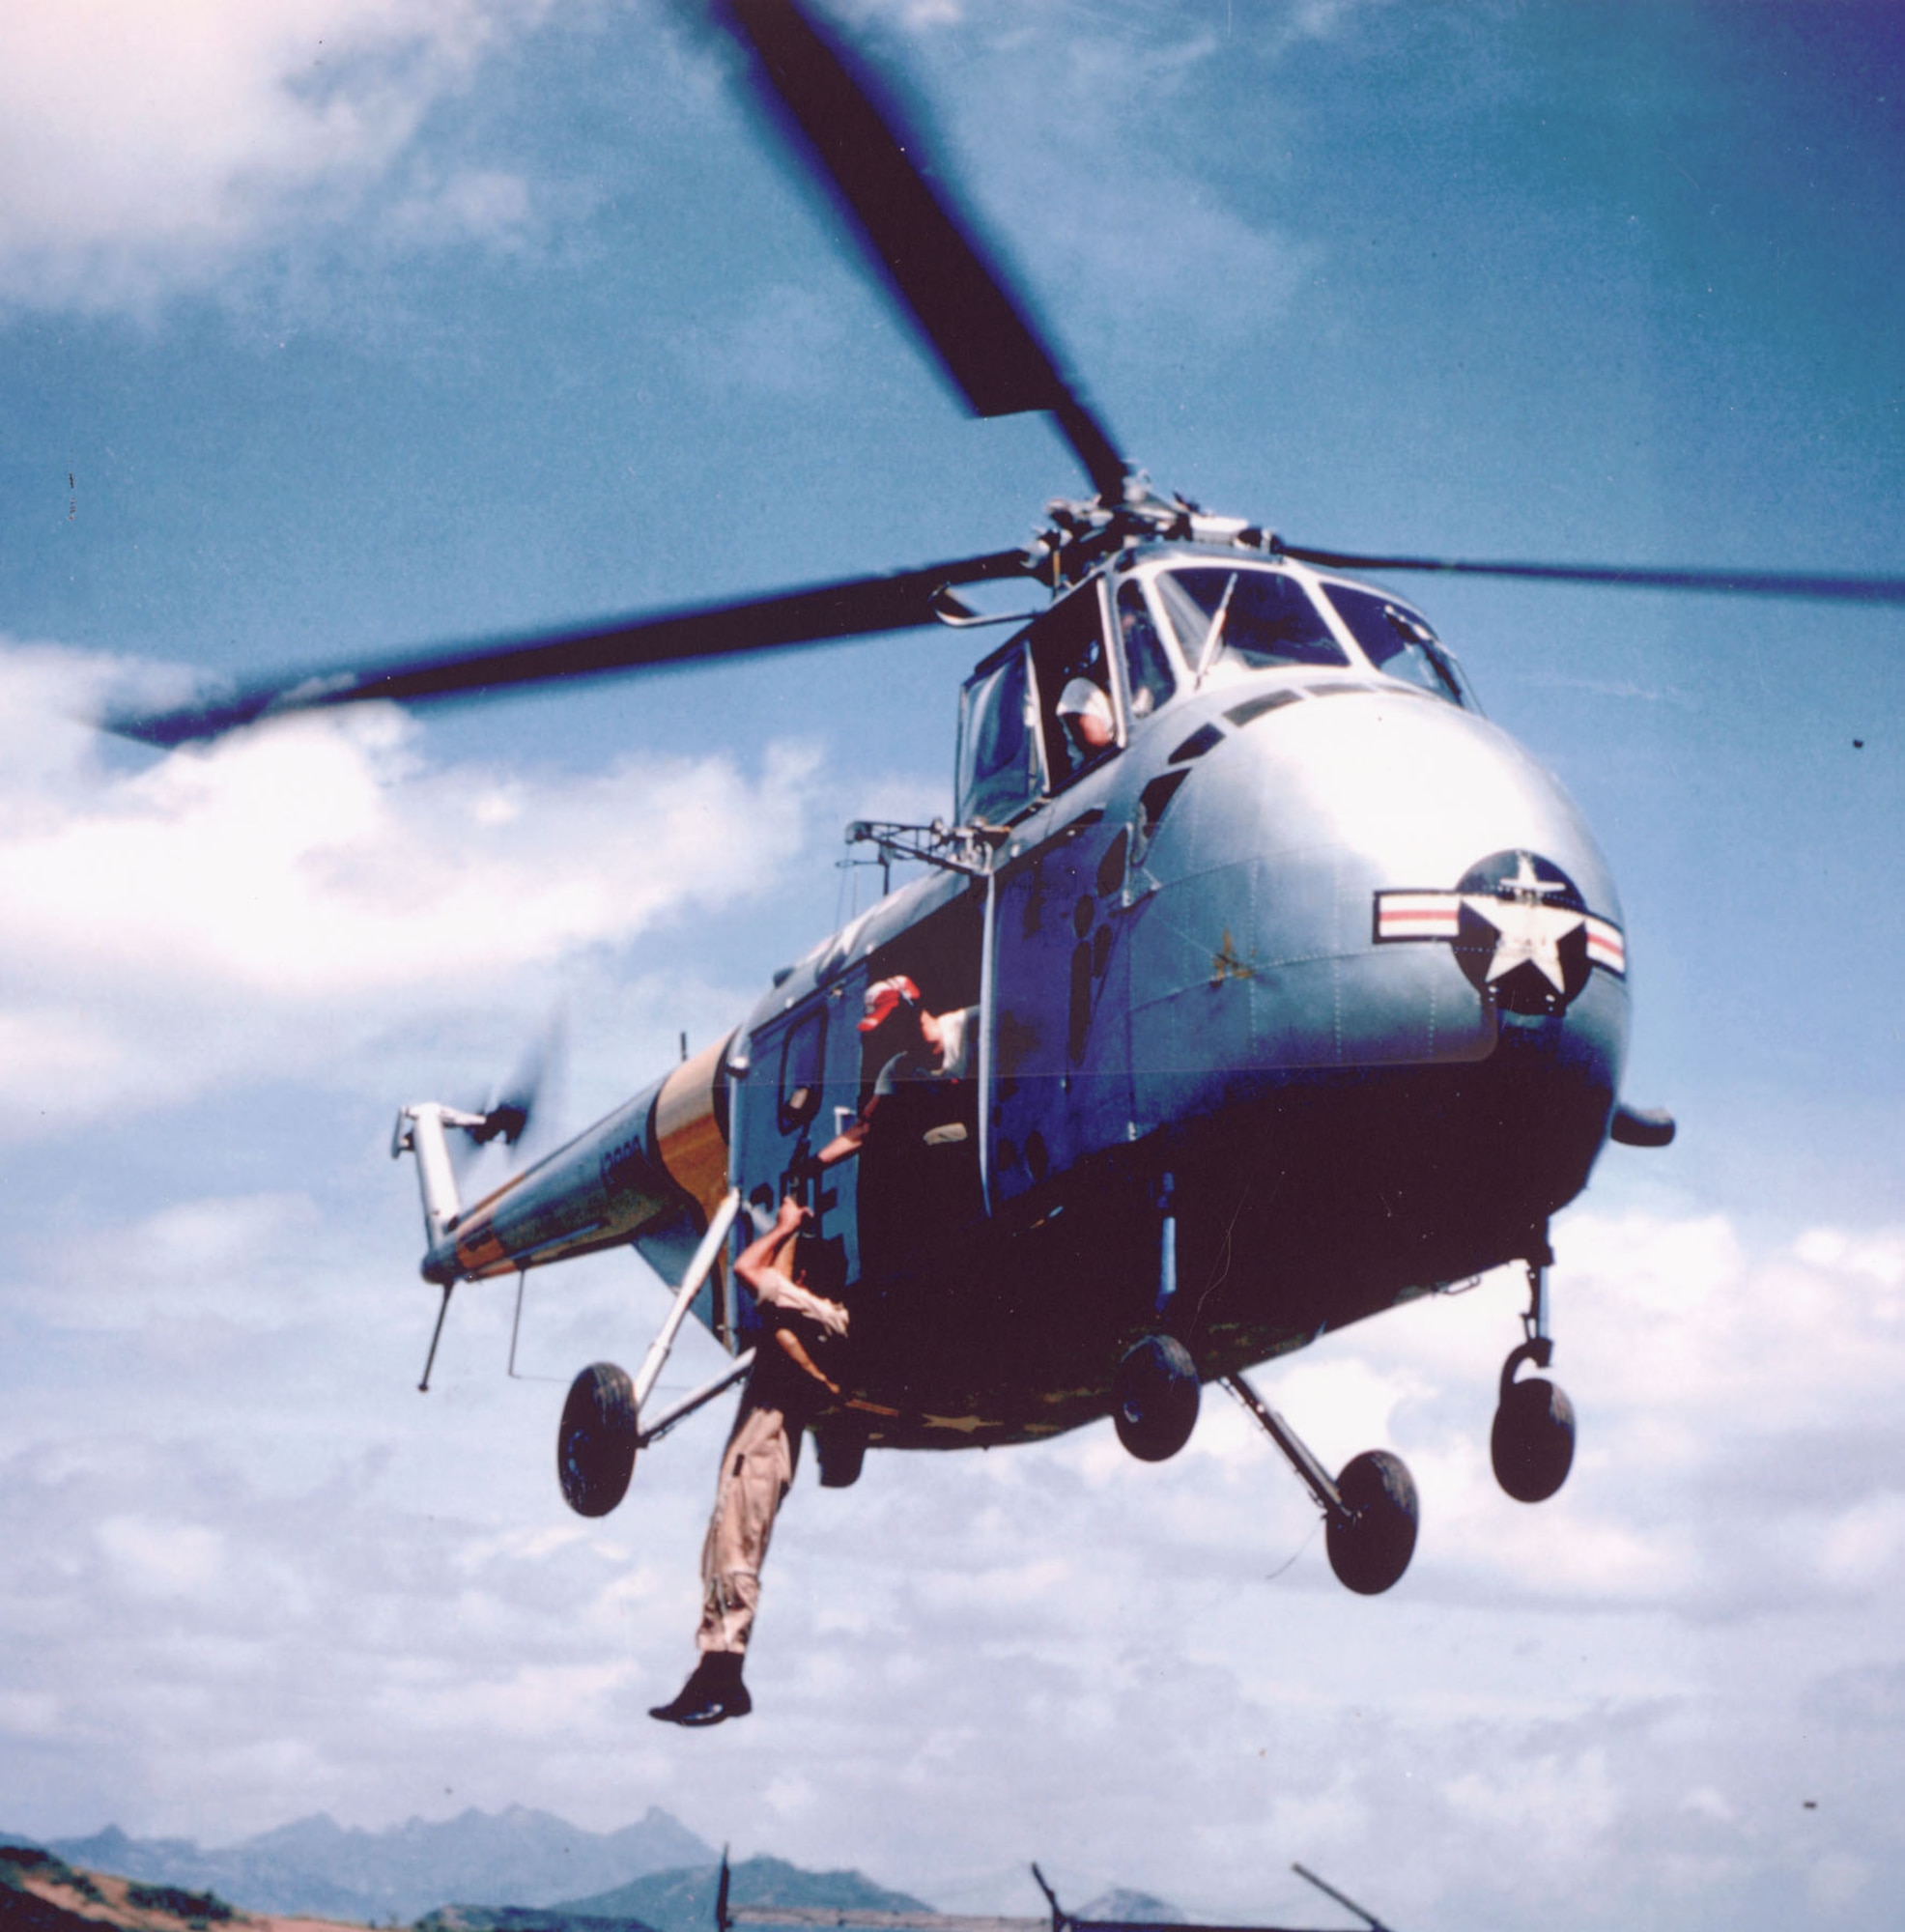 With the increasing use of helicopters, the USAF developed new rescue techniques including using hydraulic winches. Here, an Airman is hoisted aboard a hovering SH-19. (U.S. Air Force photo)